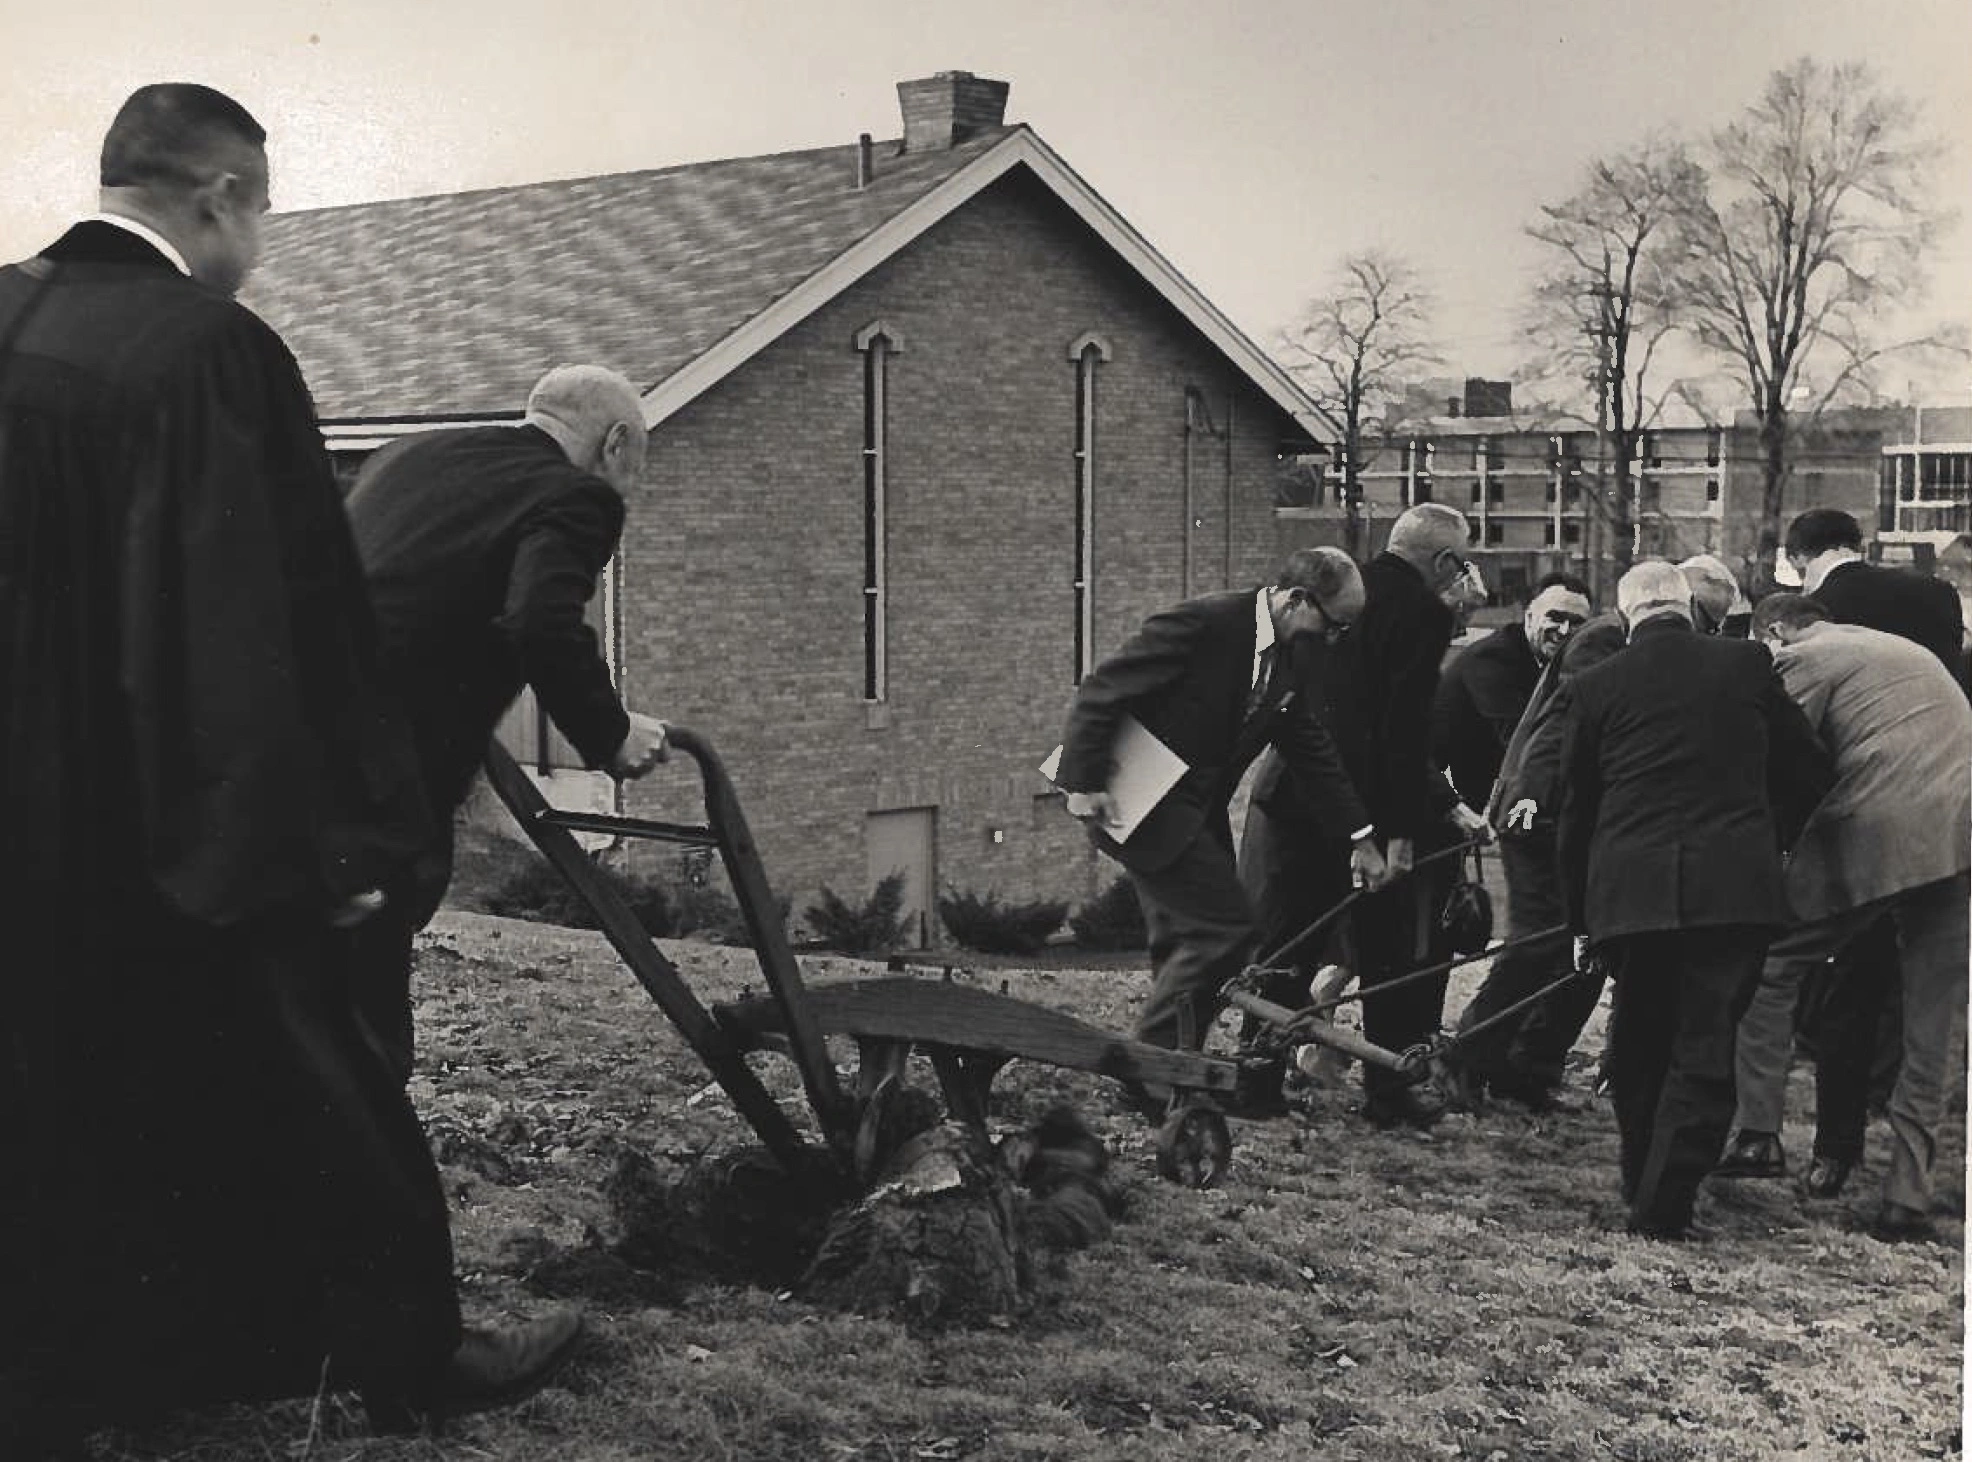 Having grown substantially, Kent Presbyterian Church needed to expand their building. This photo is taken showing members of the congregation and community breaking ground.